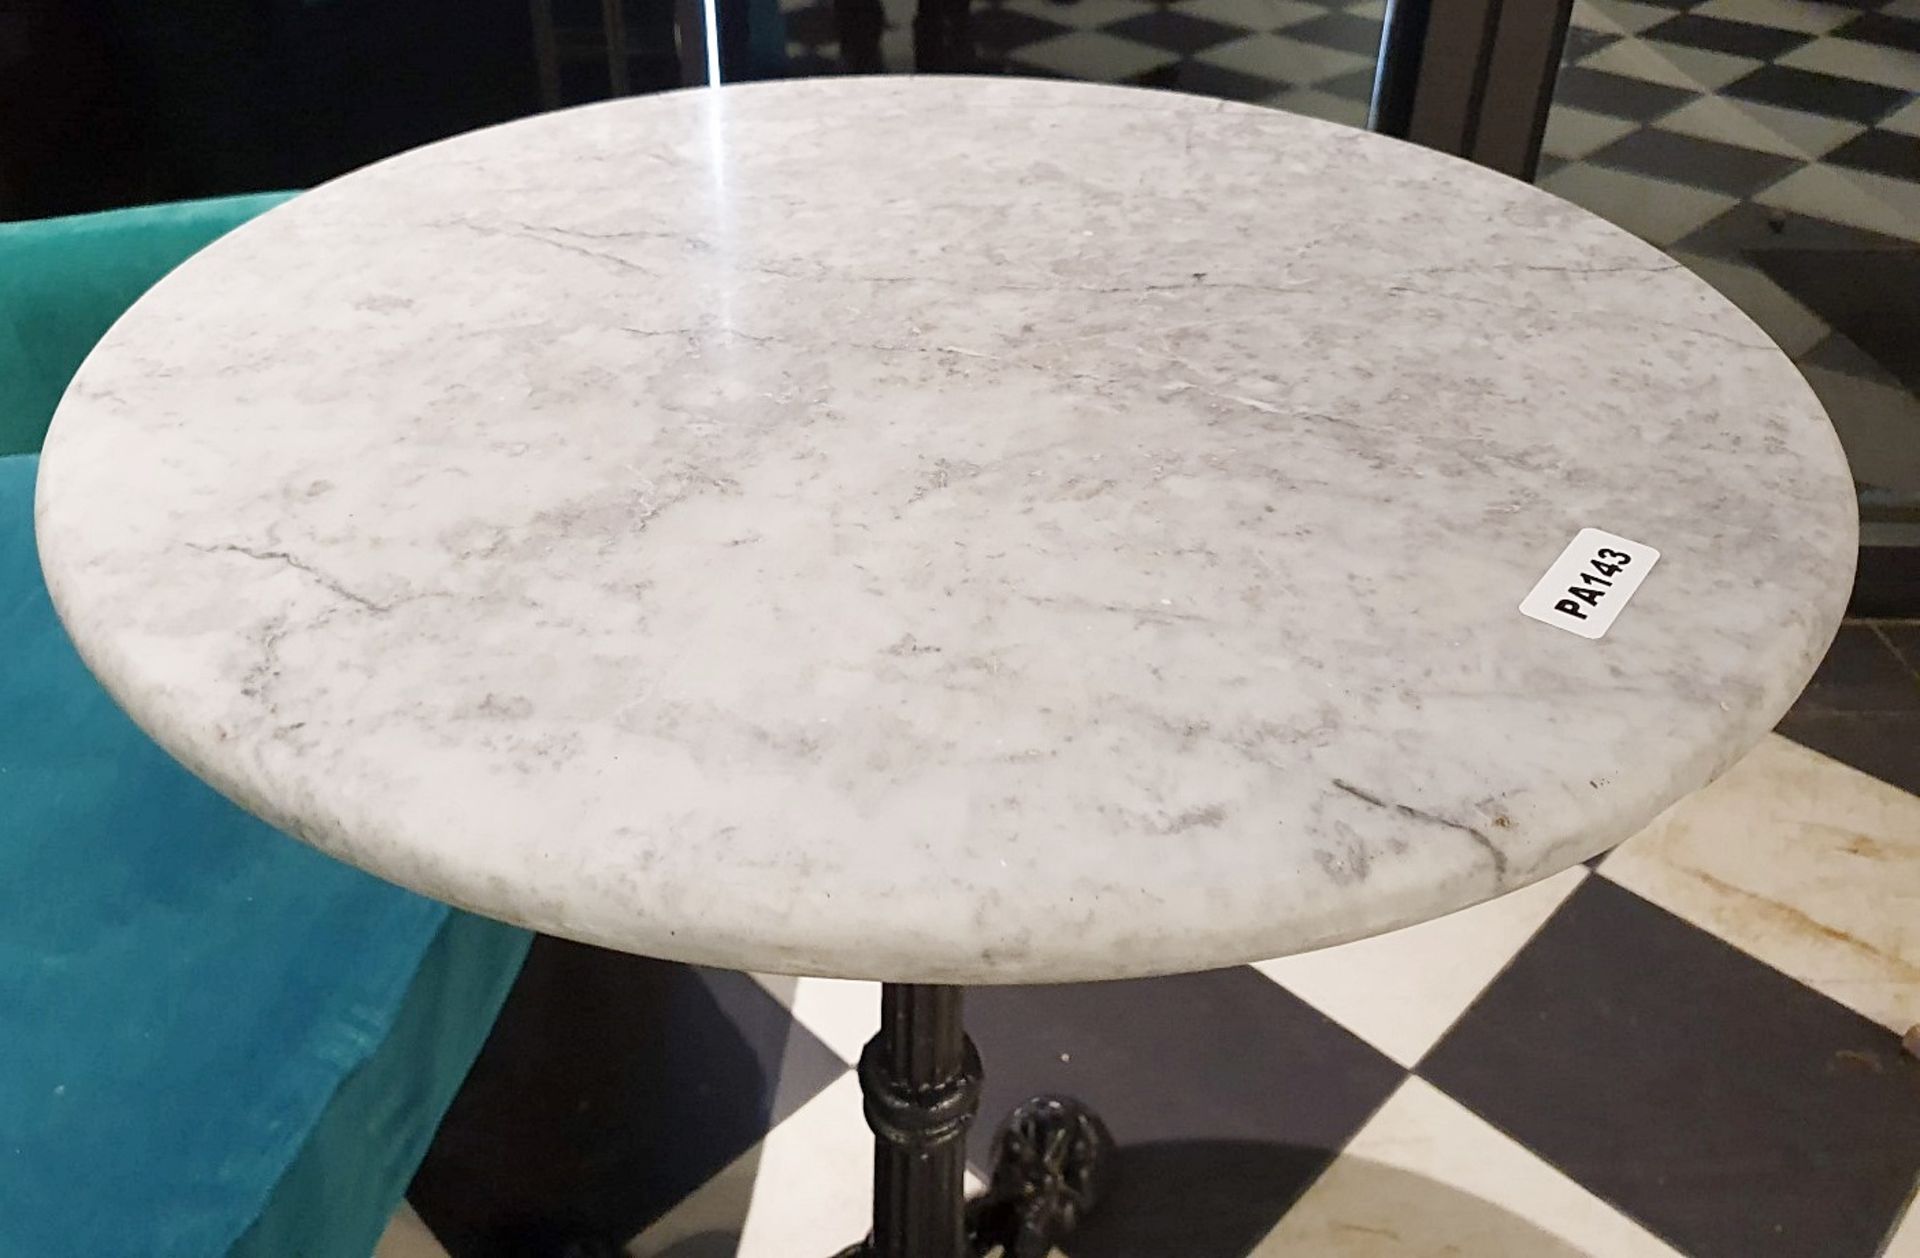 5 x Bistro Tables With Ornate Cast Iron Bases and White Marble Tops - H77 x W55 cms - Ref PA143 - - Image 4 of 4